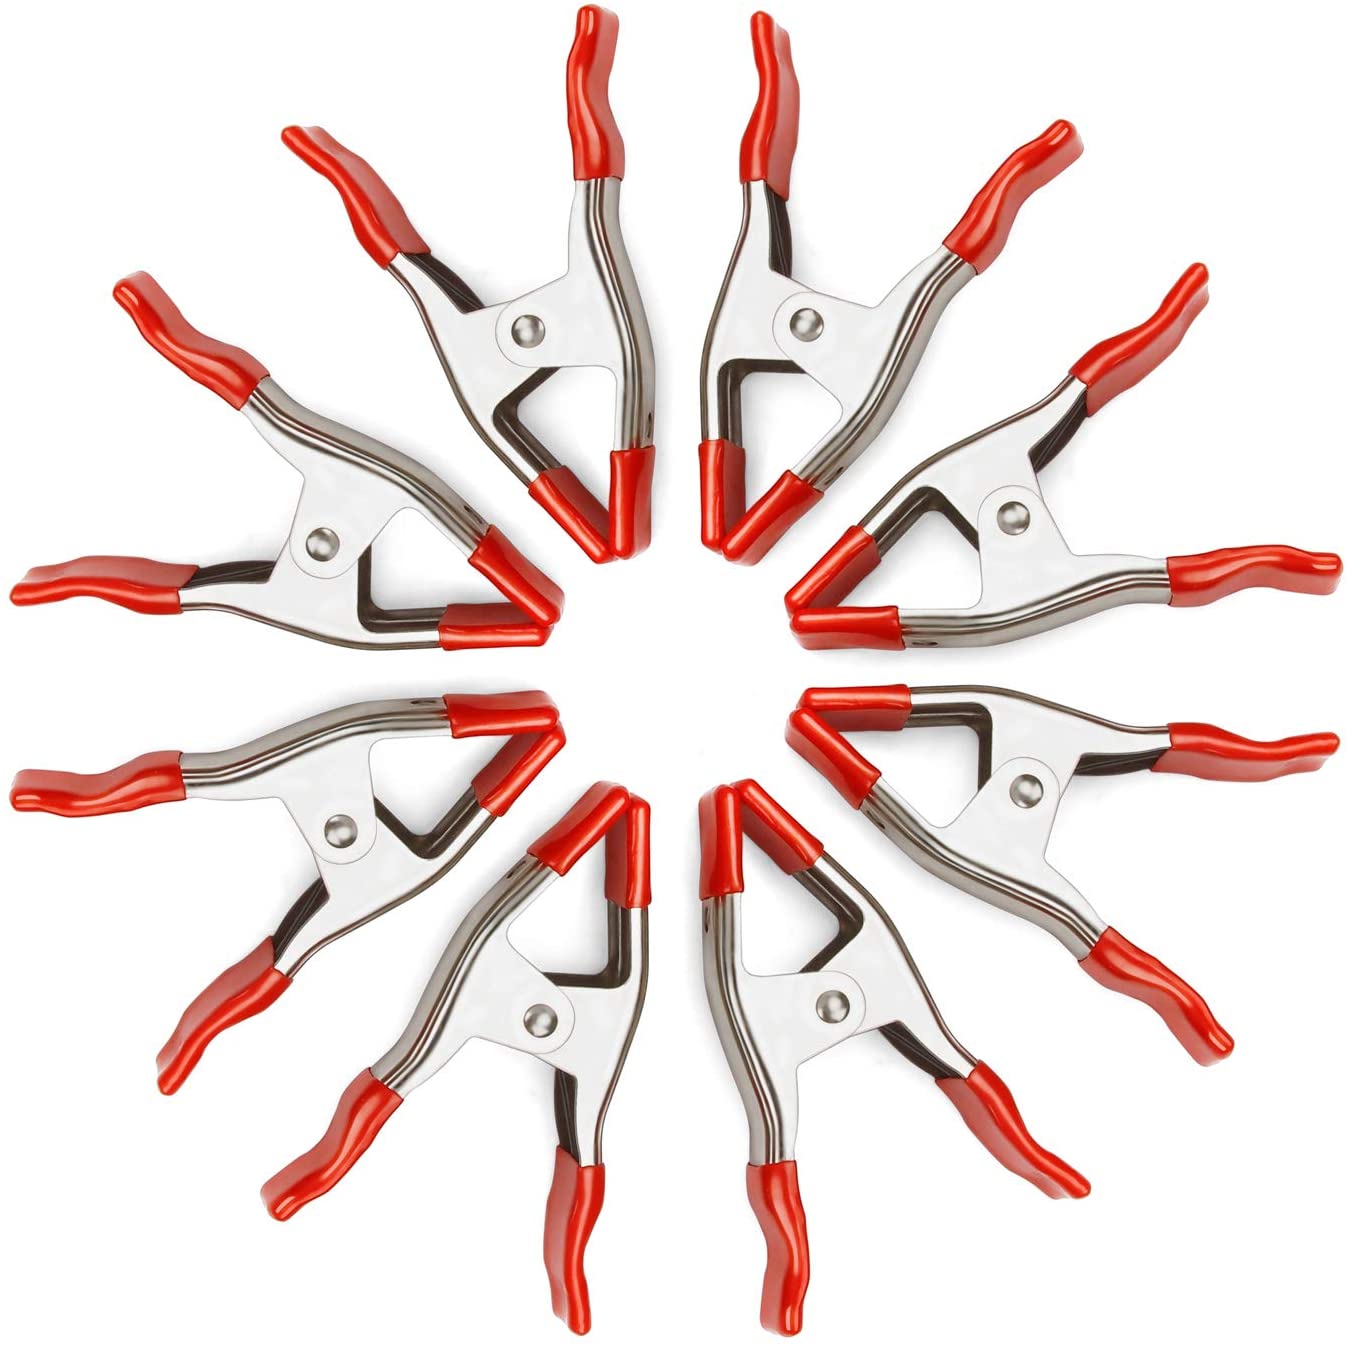 Crafter's Square Craft Claps 2 inch Heavy Duty Spring Clamps - 6 PC Set 167158